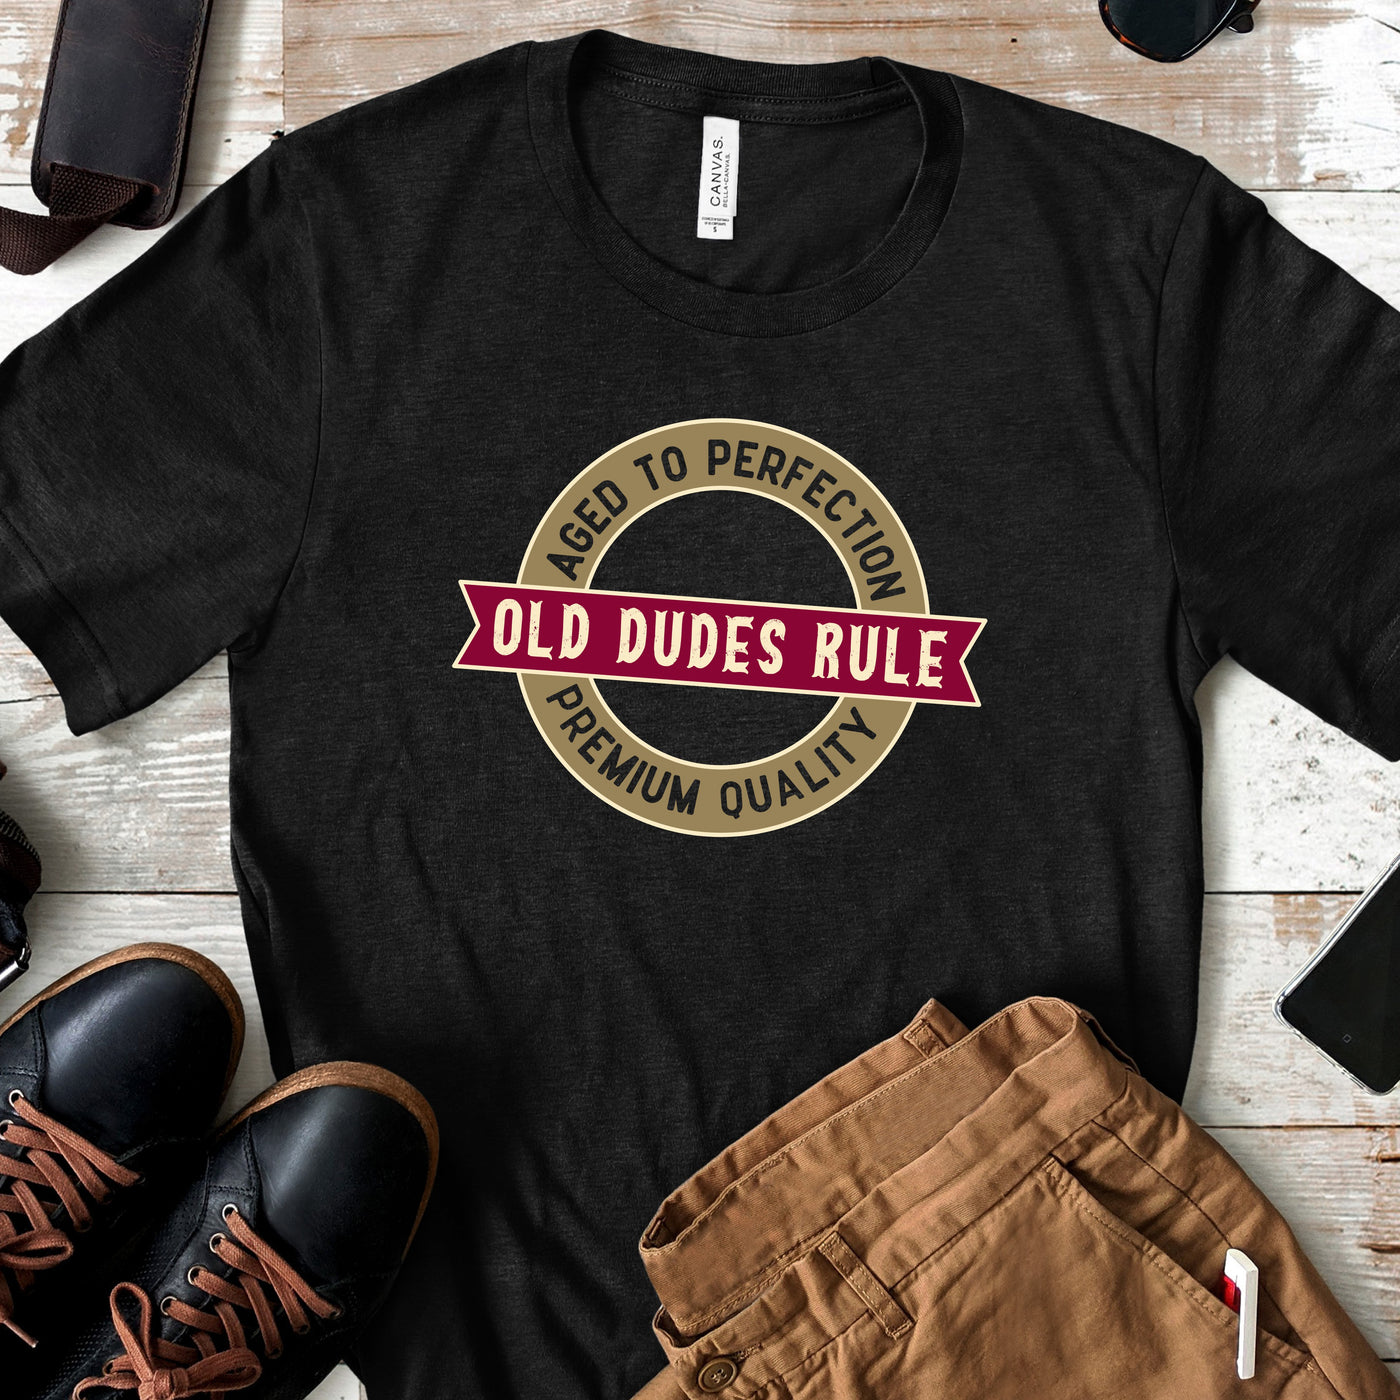 Old Dudes Rule Aged to Perfection Birthday Shirt | Men's Funny Birthday Tee